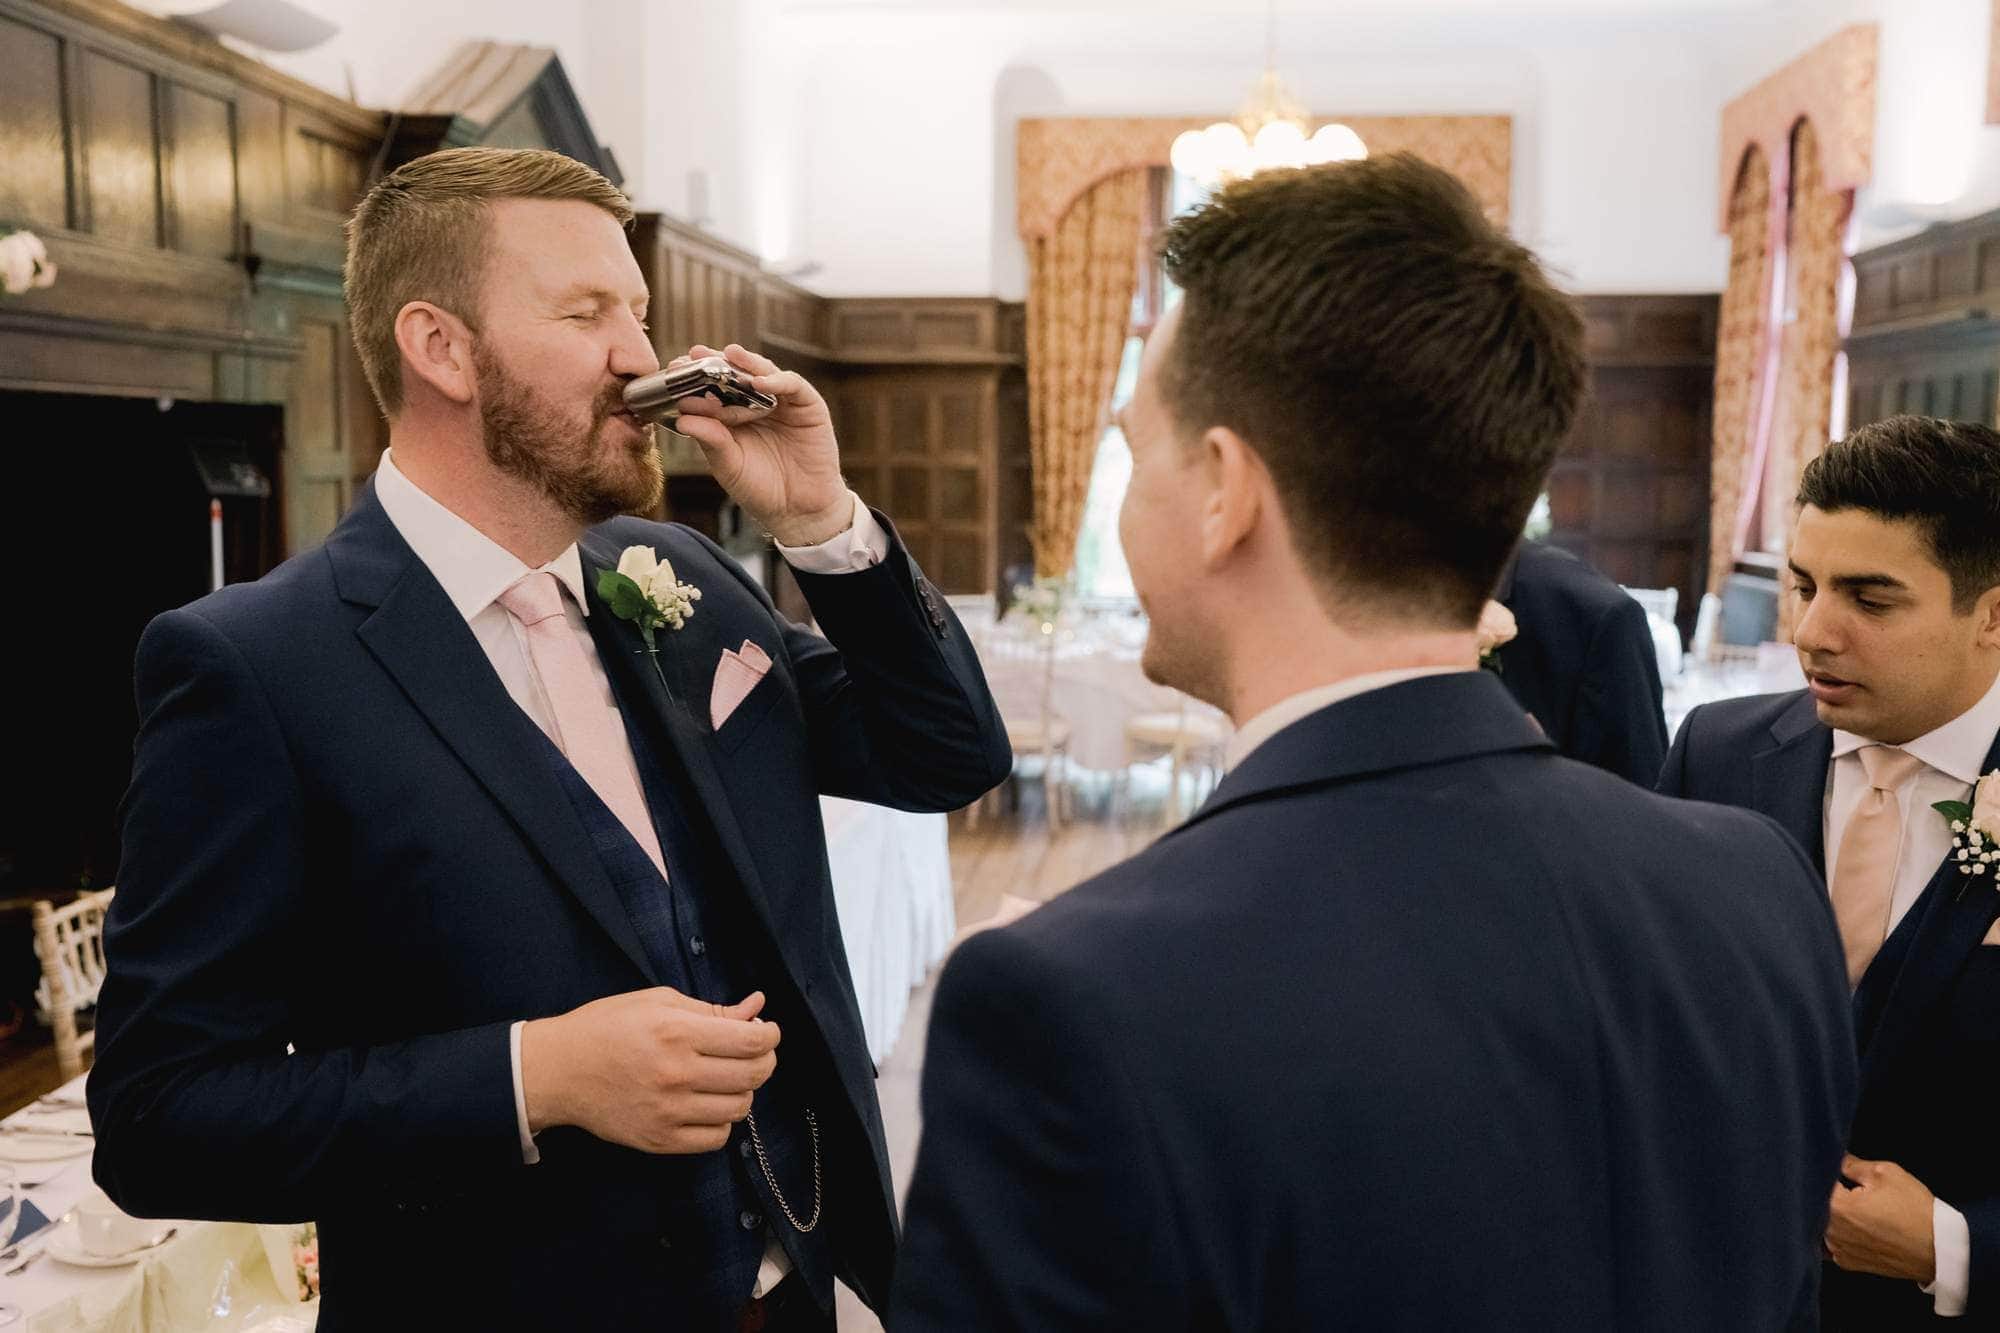 Photos of the groomsmen at Woldingham.